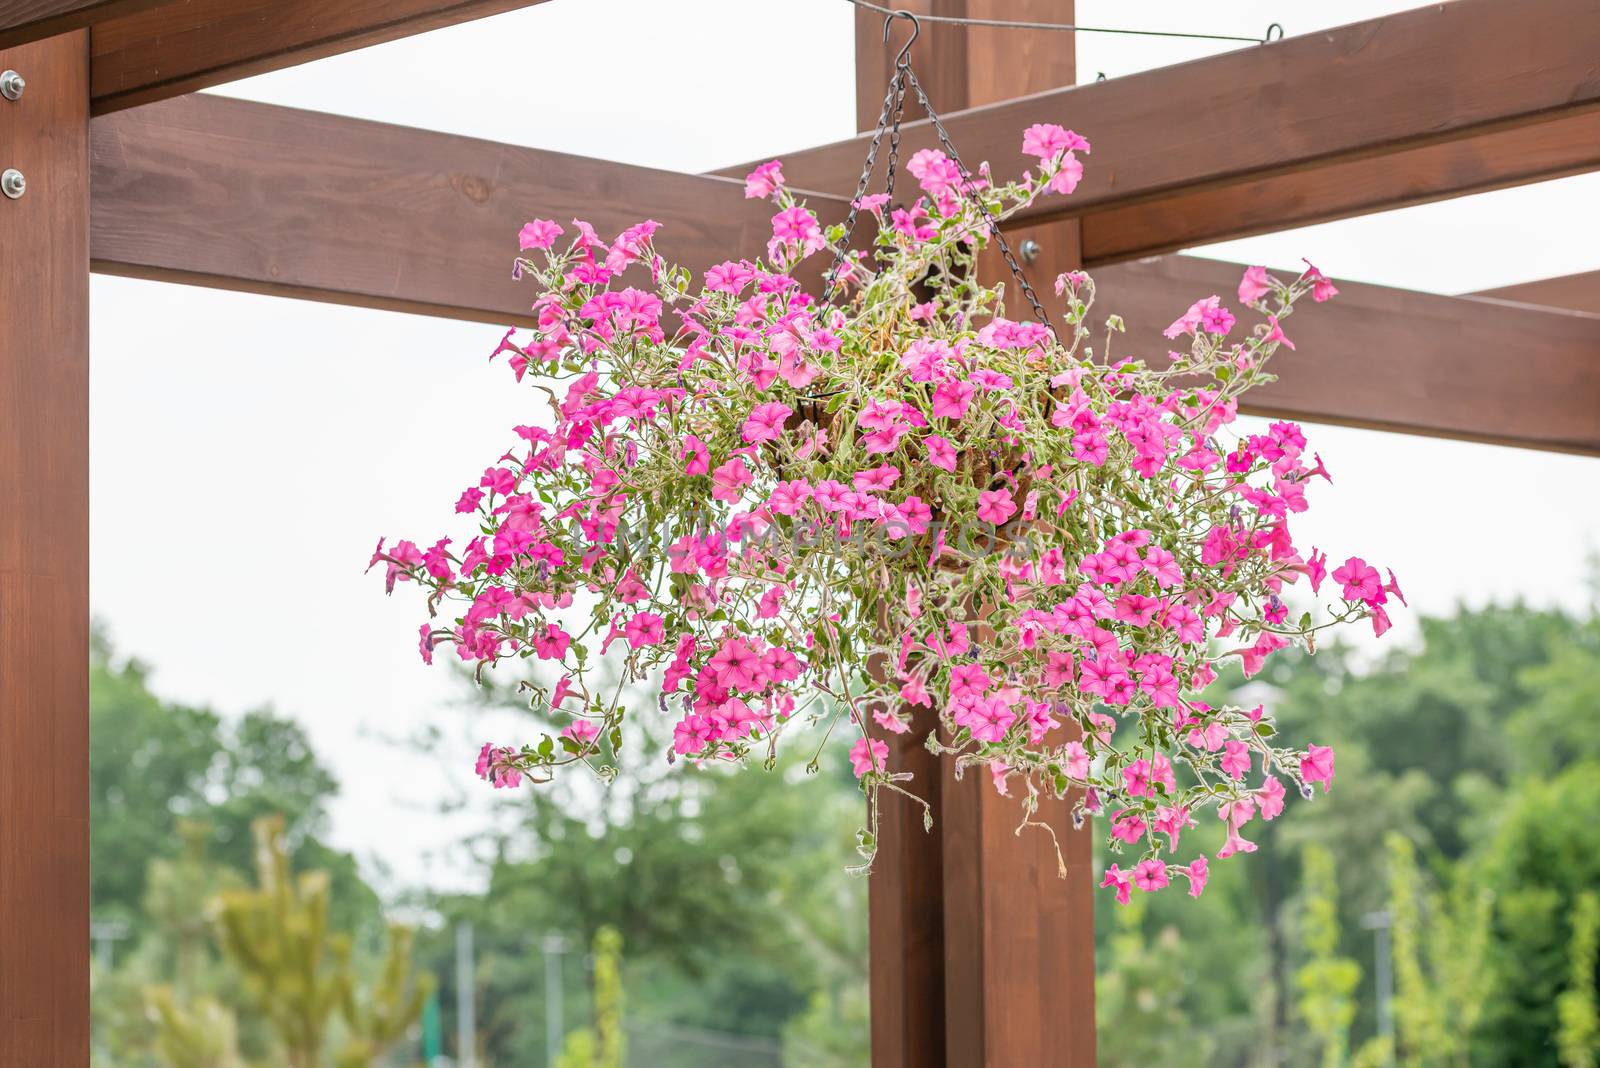 Hanging garden of pink petunia roses in the Natalka park of Kiev, Ukraine, under a warm spring sun. The flowers are placed in baskets suspended from a wooden structure of the "pergola" type